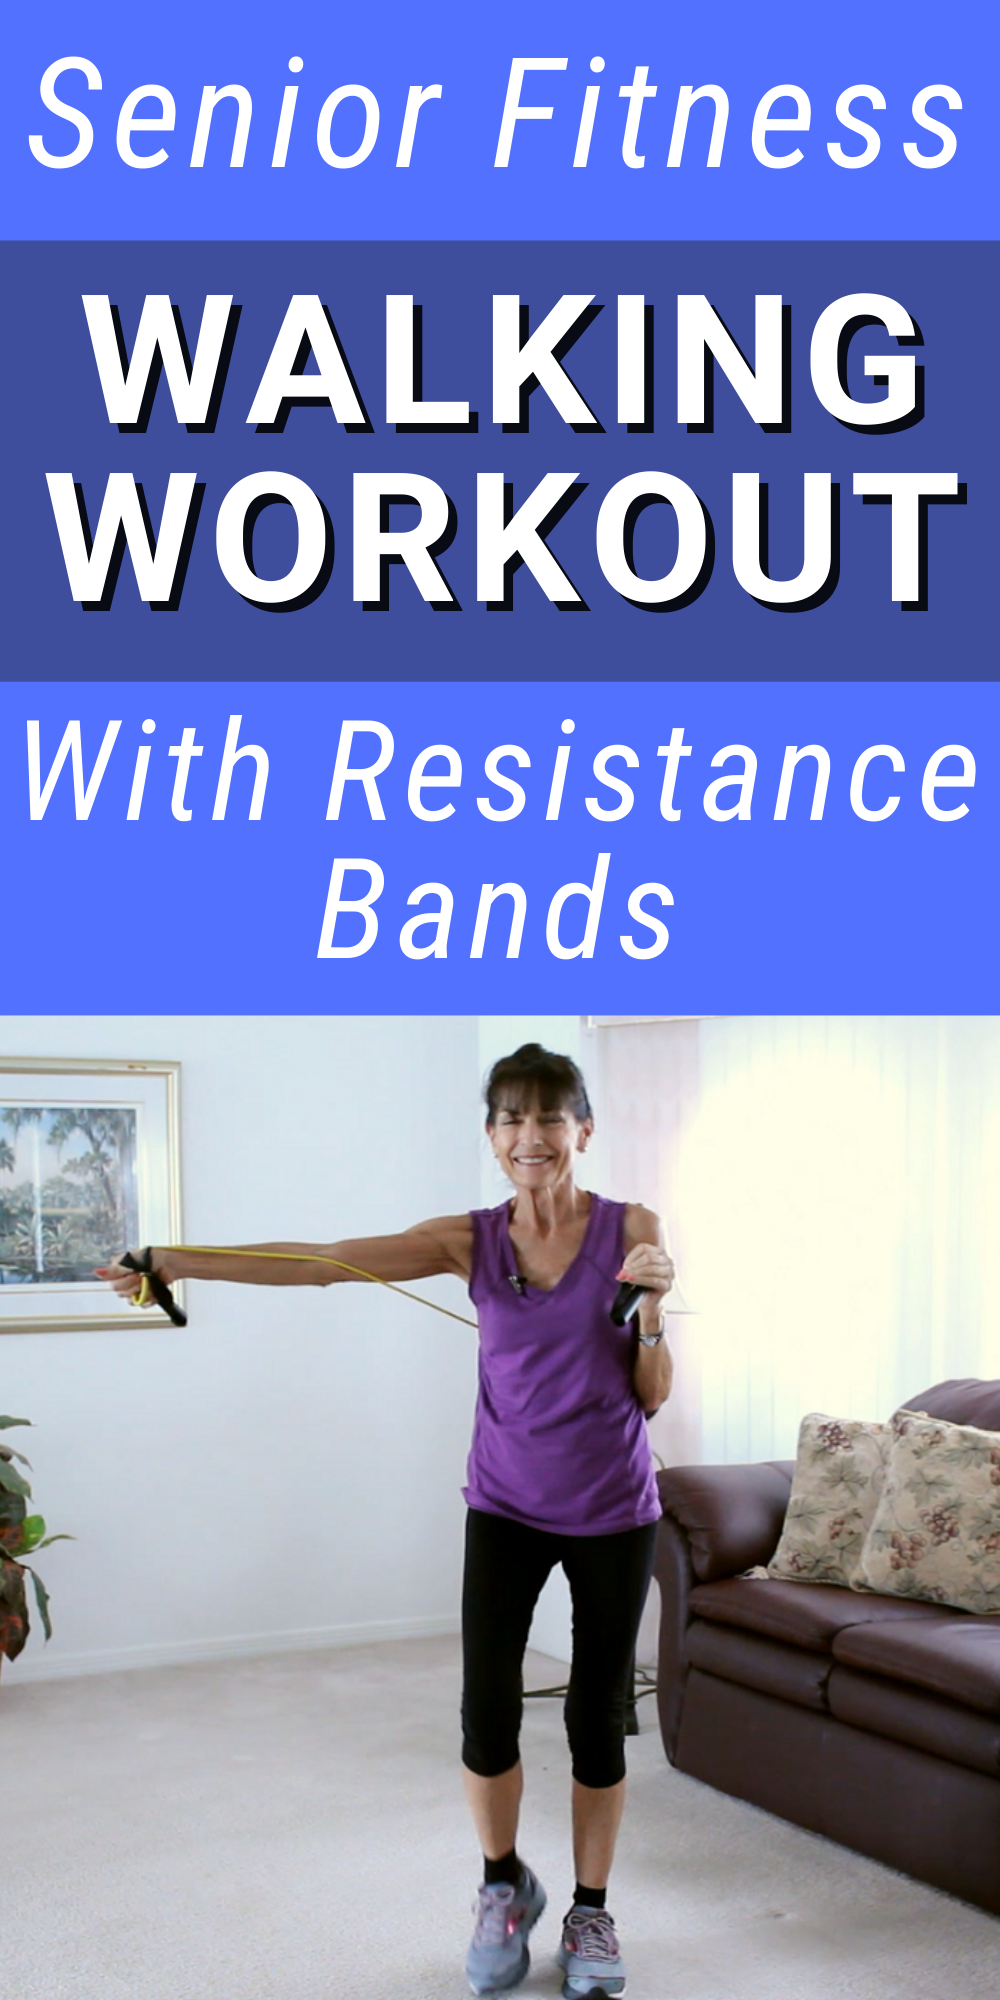 use resistance bands while walking